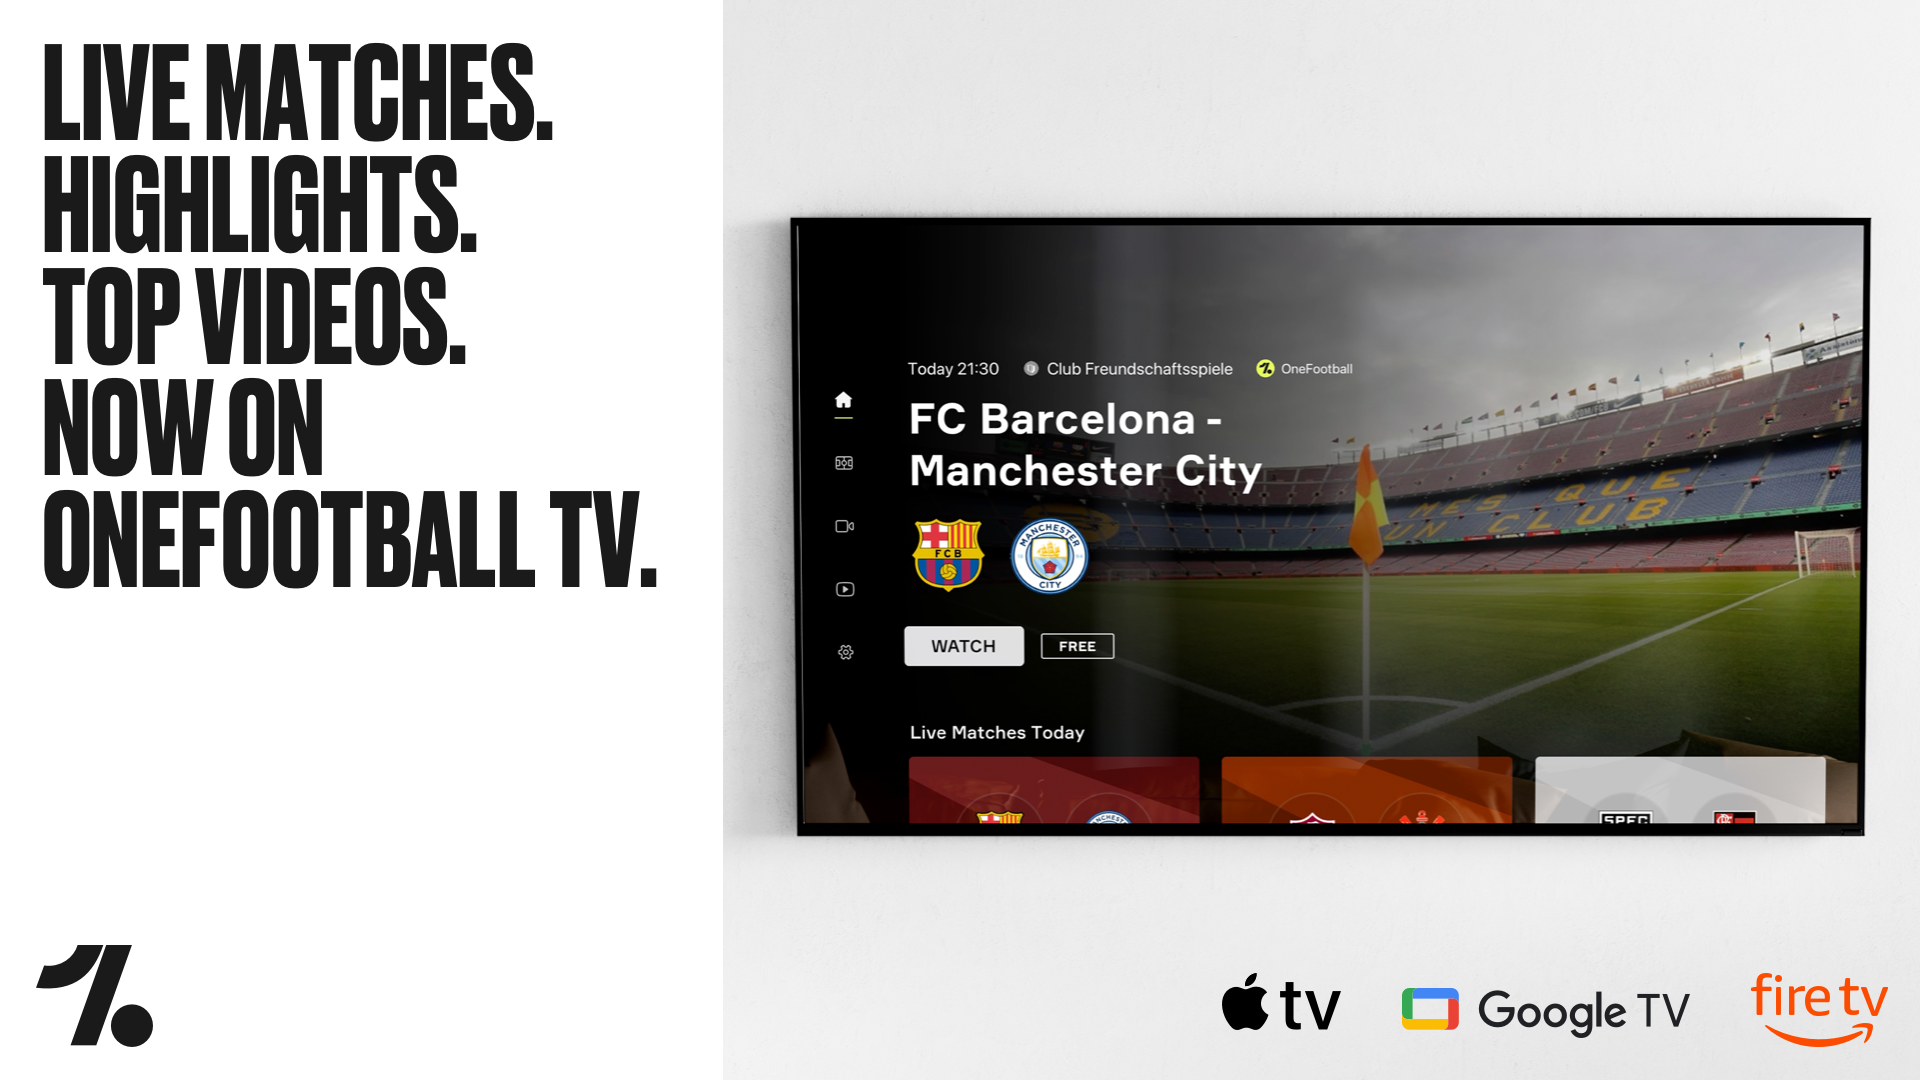 OneFootball launches first TV app to bring the game to millions of homes around the world